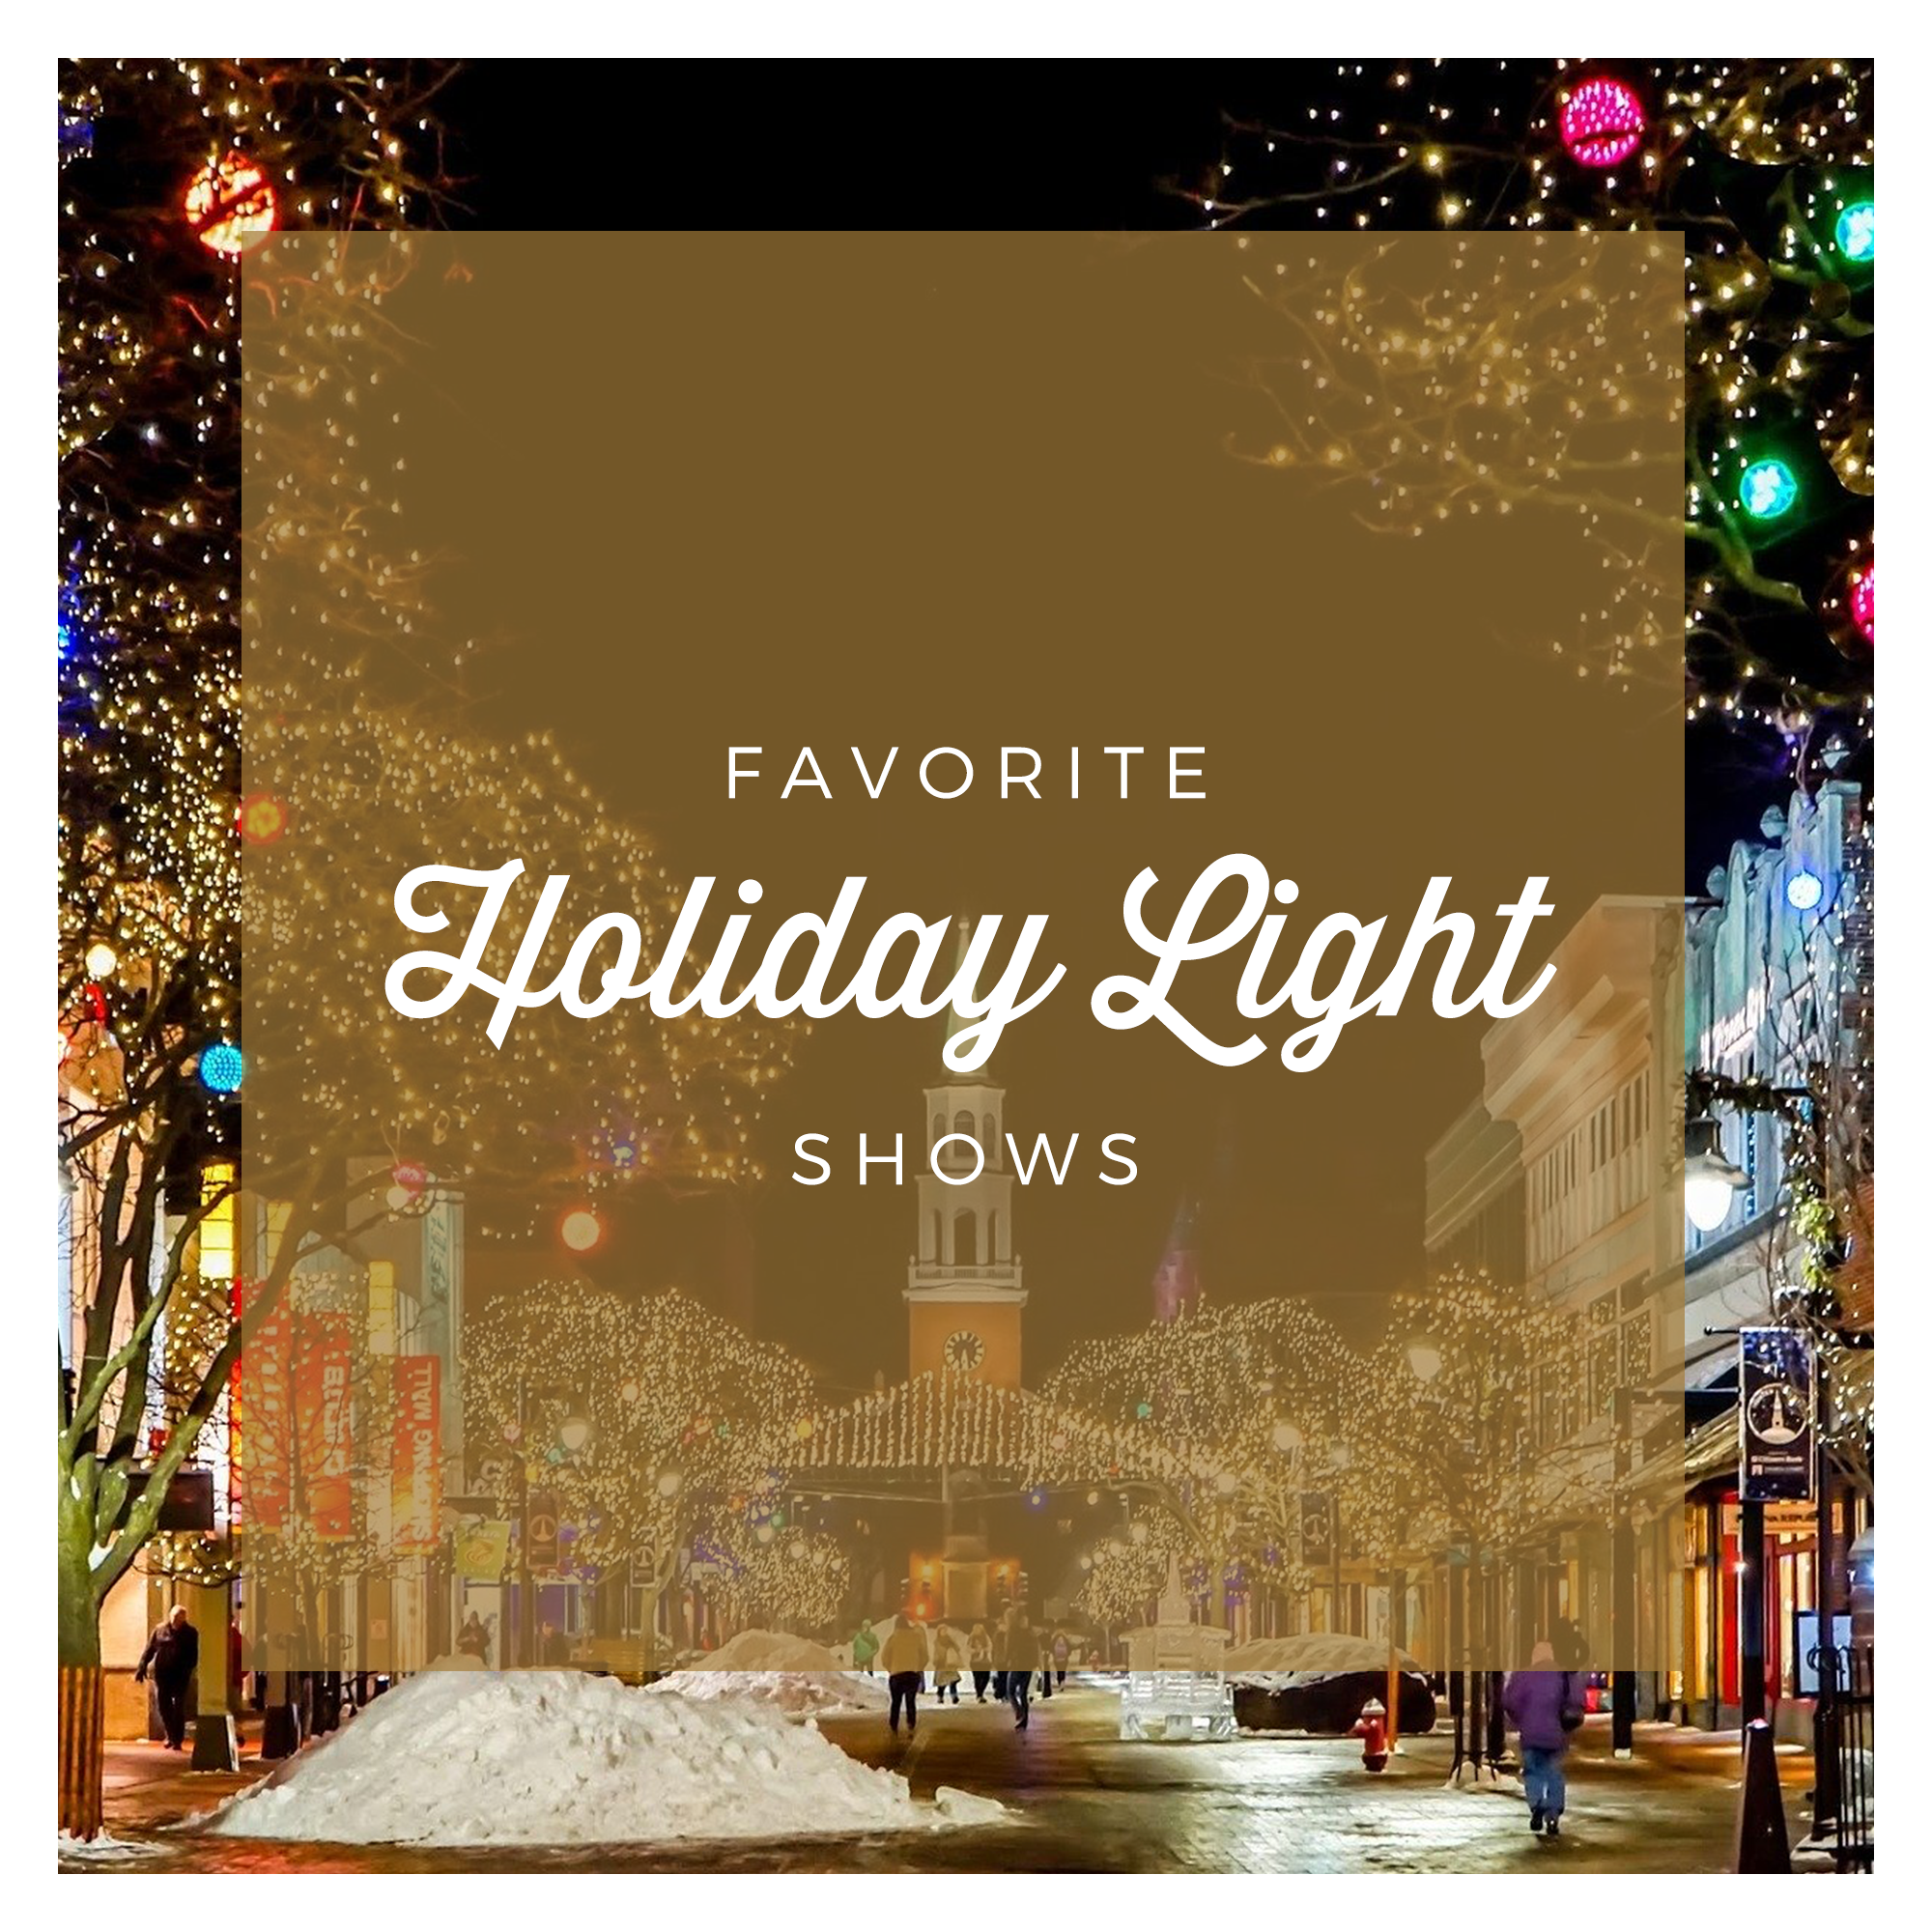 Best Holiday Light Displays in the Chicago land area